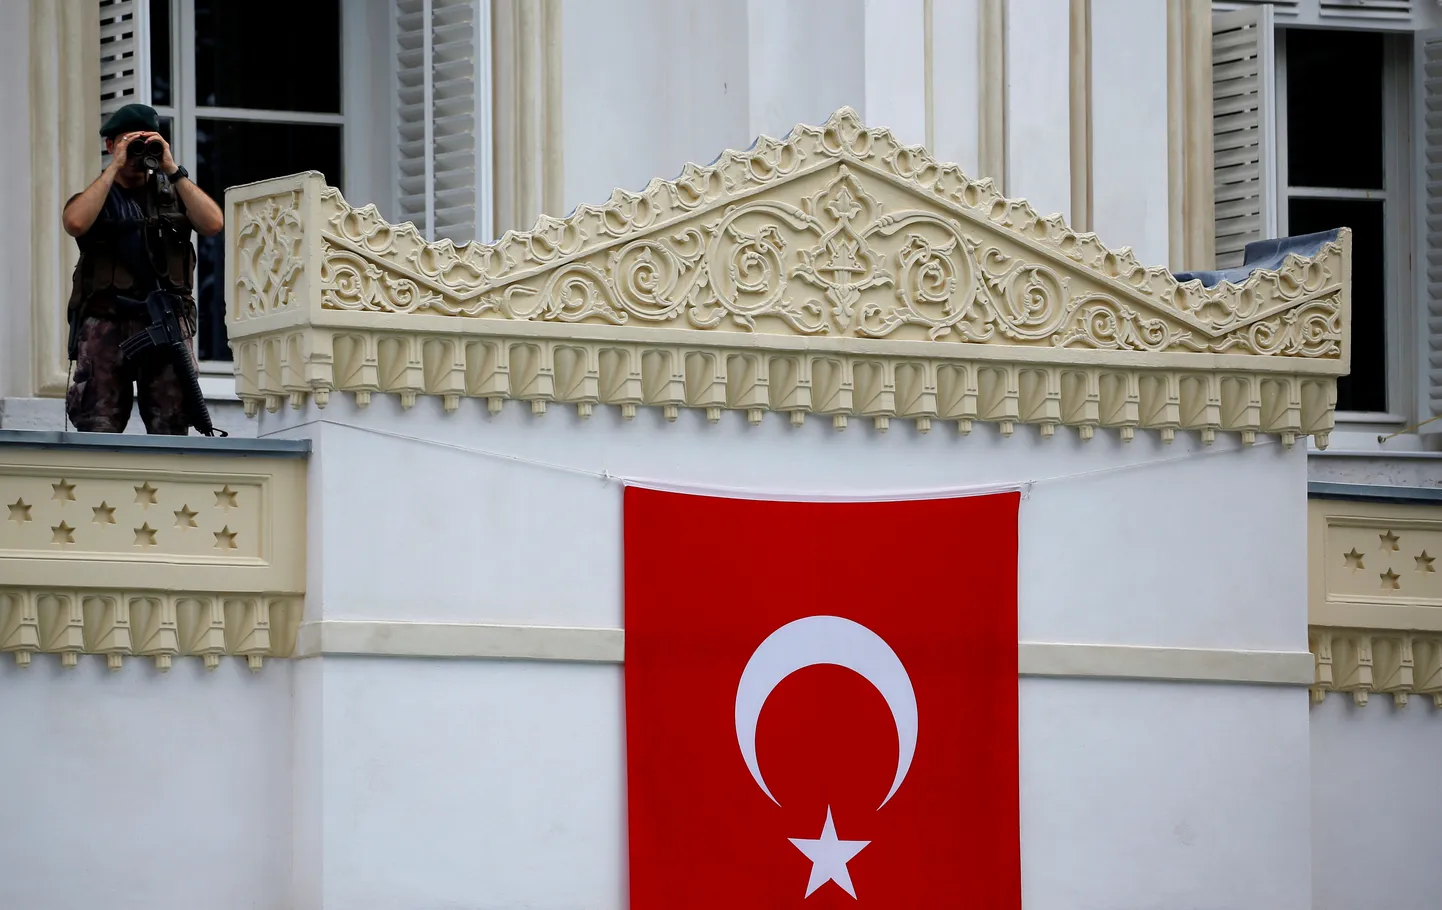 FILE PHOTO: A member of police special forces stands guard as Turkish President Tayyip Erdogan attends the re-opening of the Ottoman-era Yildiz Hamidiye mosque in Istanbul, Turkey, August 4, 2017. REUTERS/Murad Sezer/File Photo